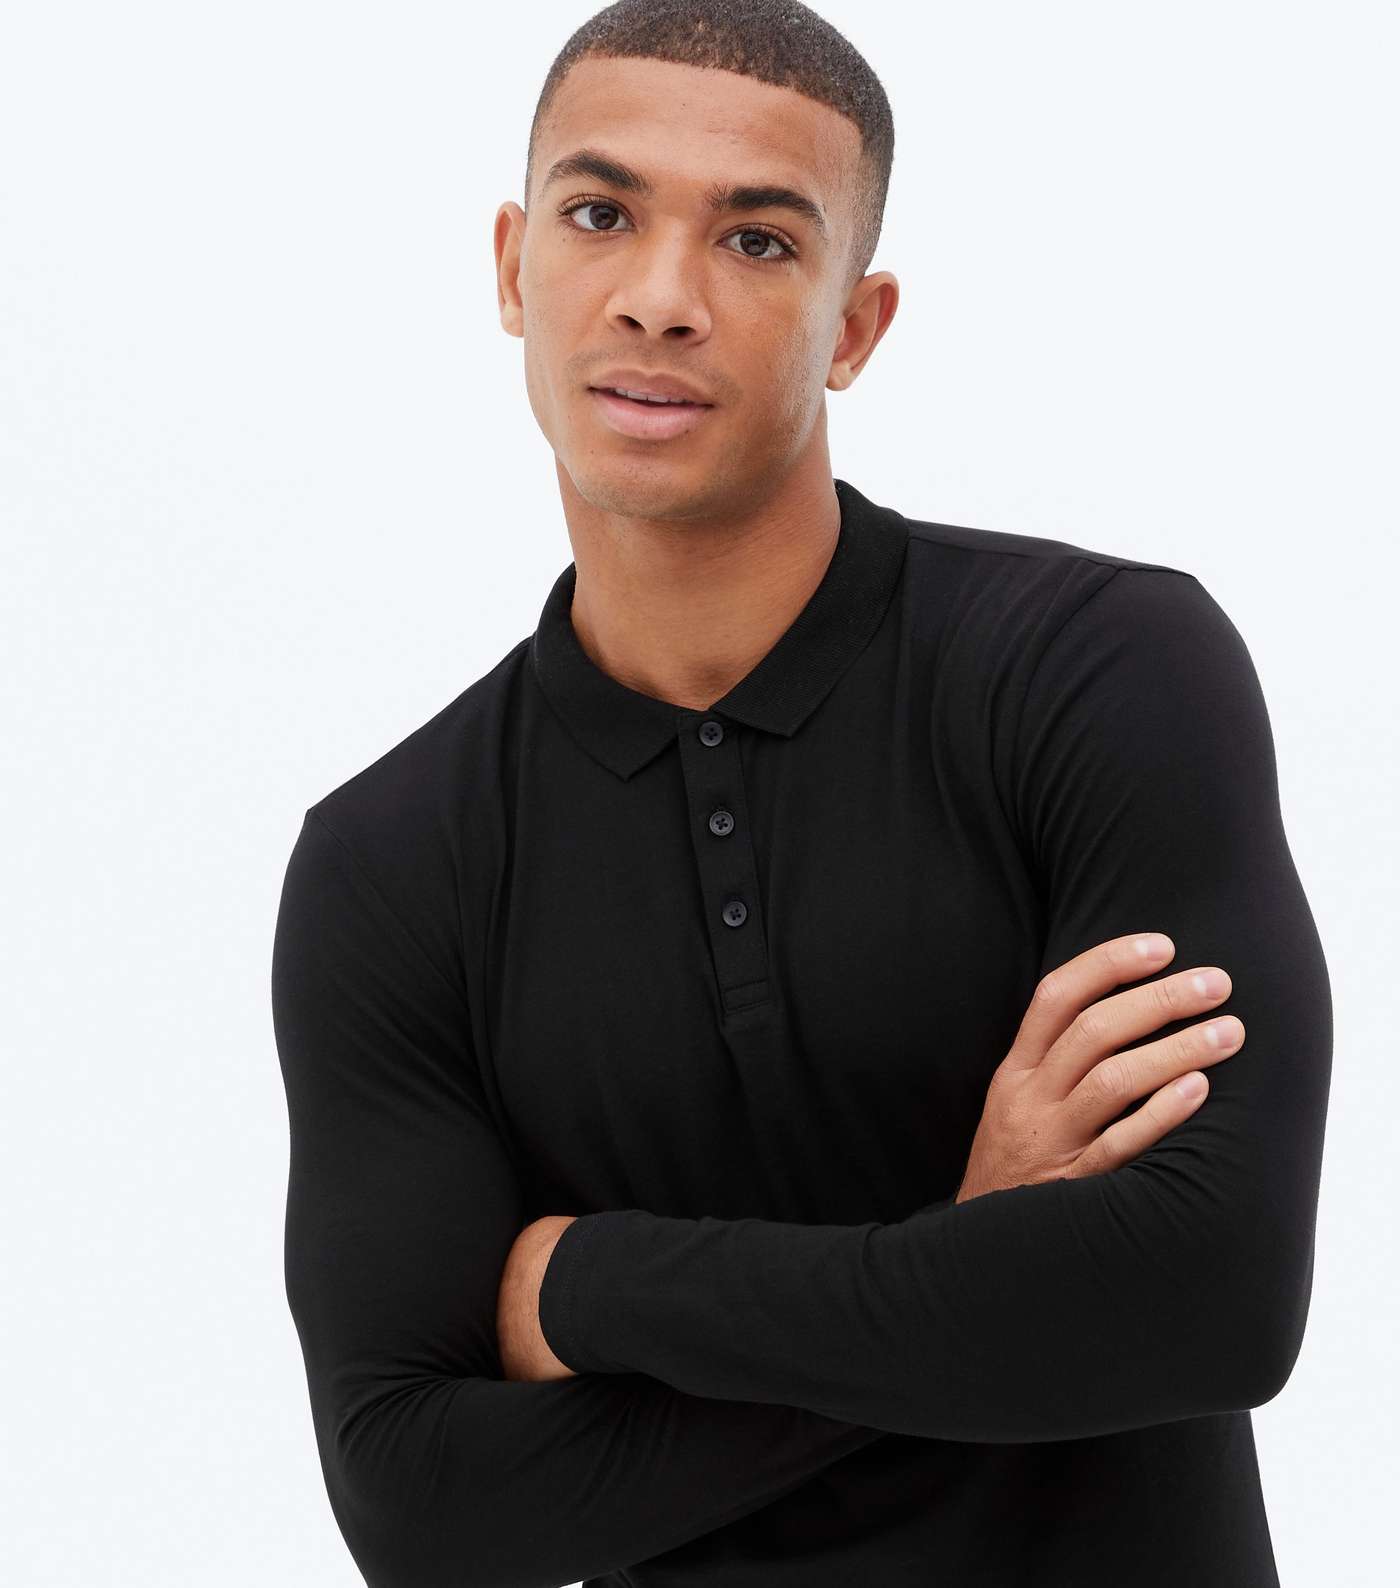 Black Long Sleeve Muscle Fit Polo Shirt Image 3